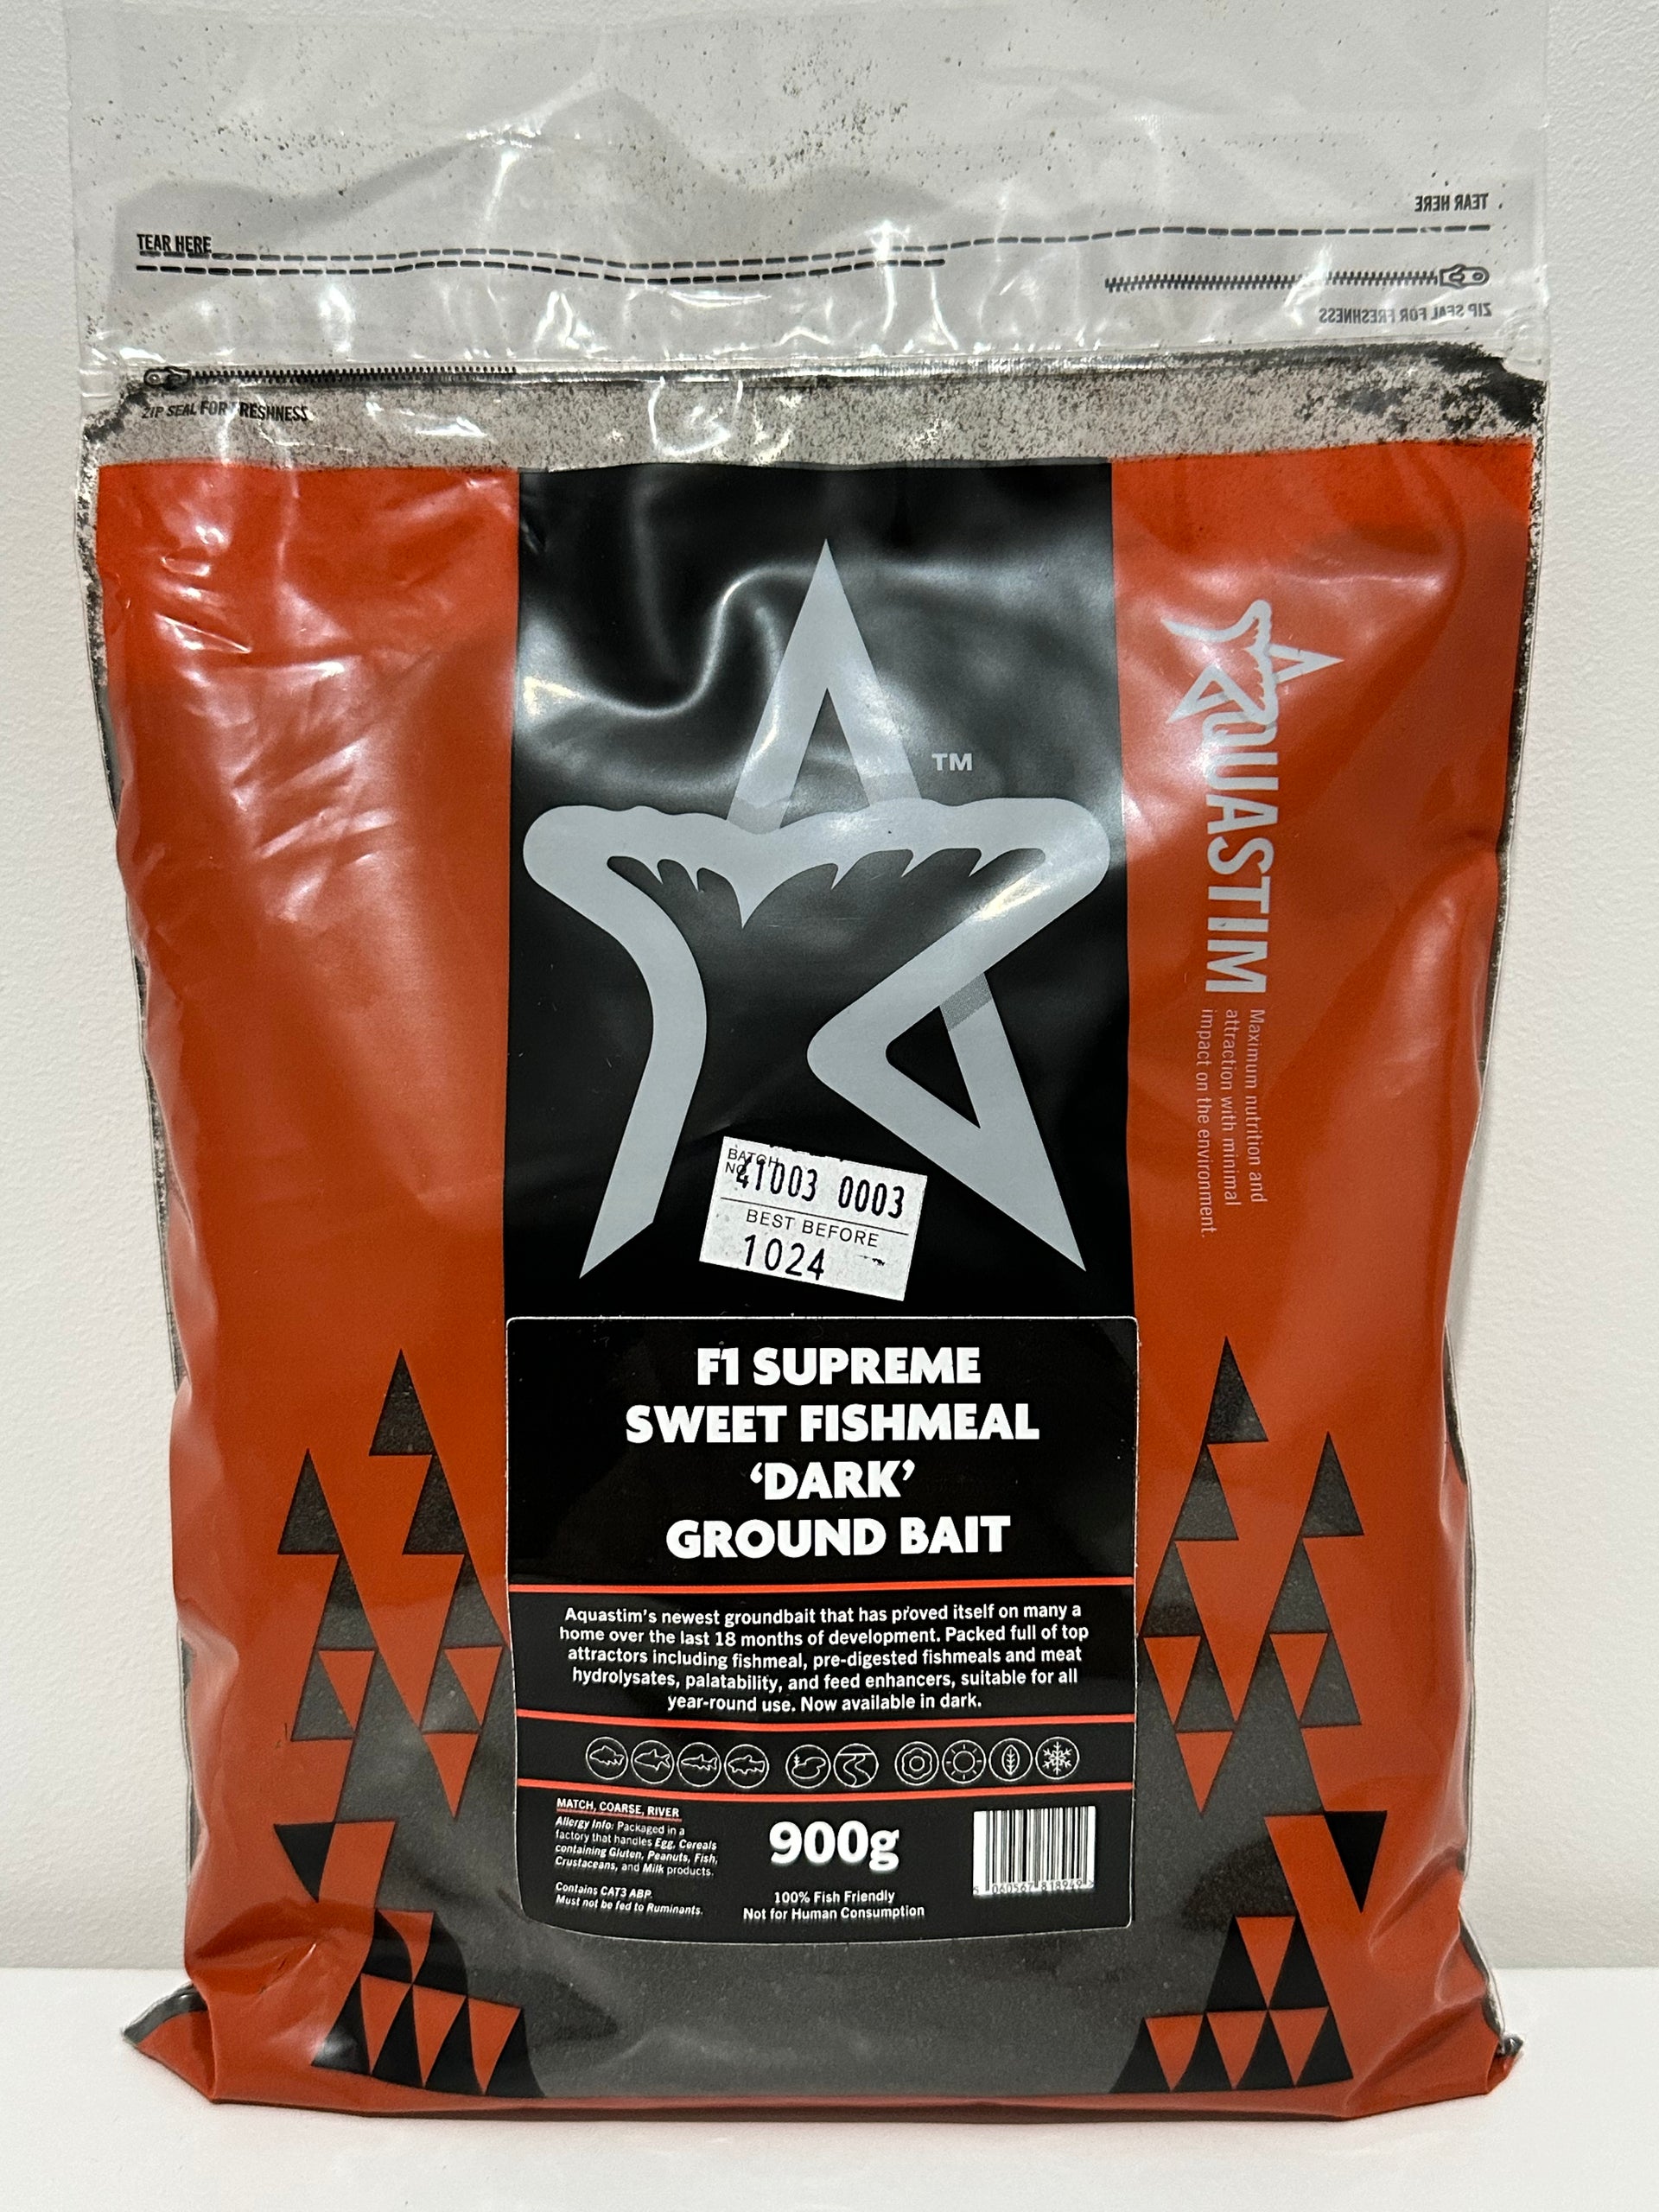 When to use a fishmeal groundbait